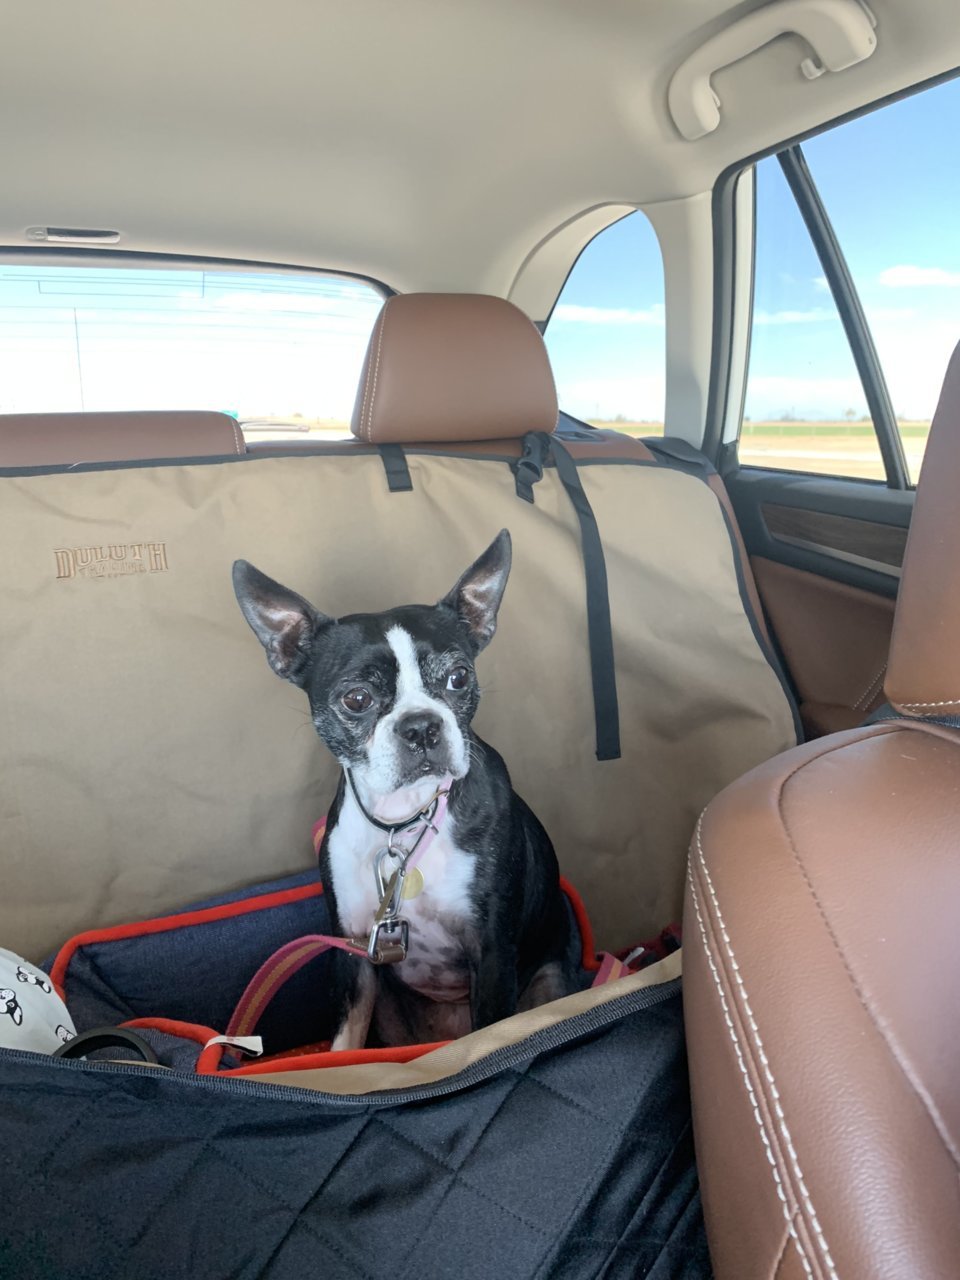 Rear seat covers for dogs?